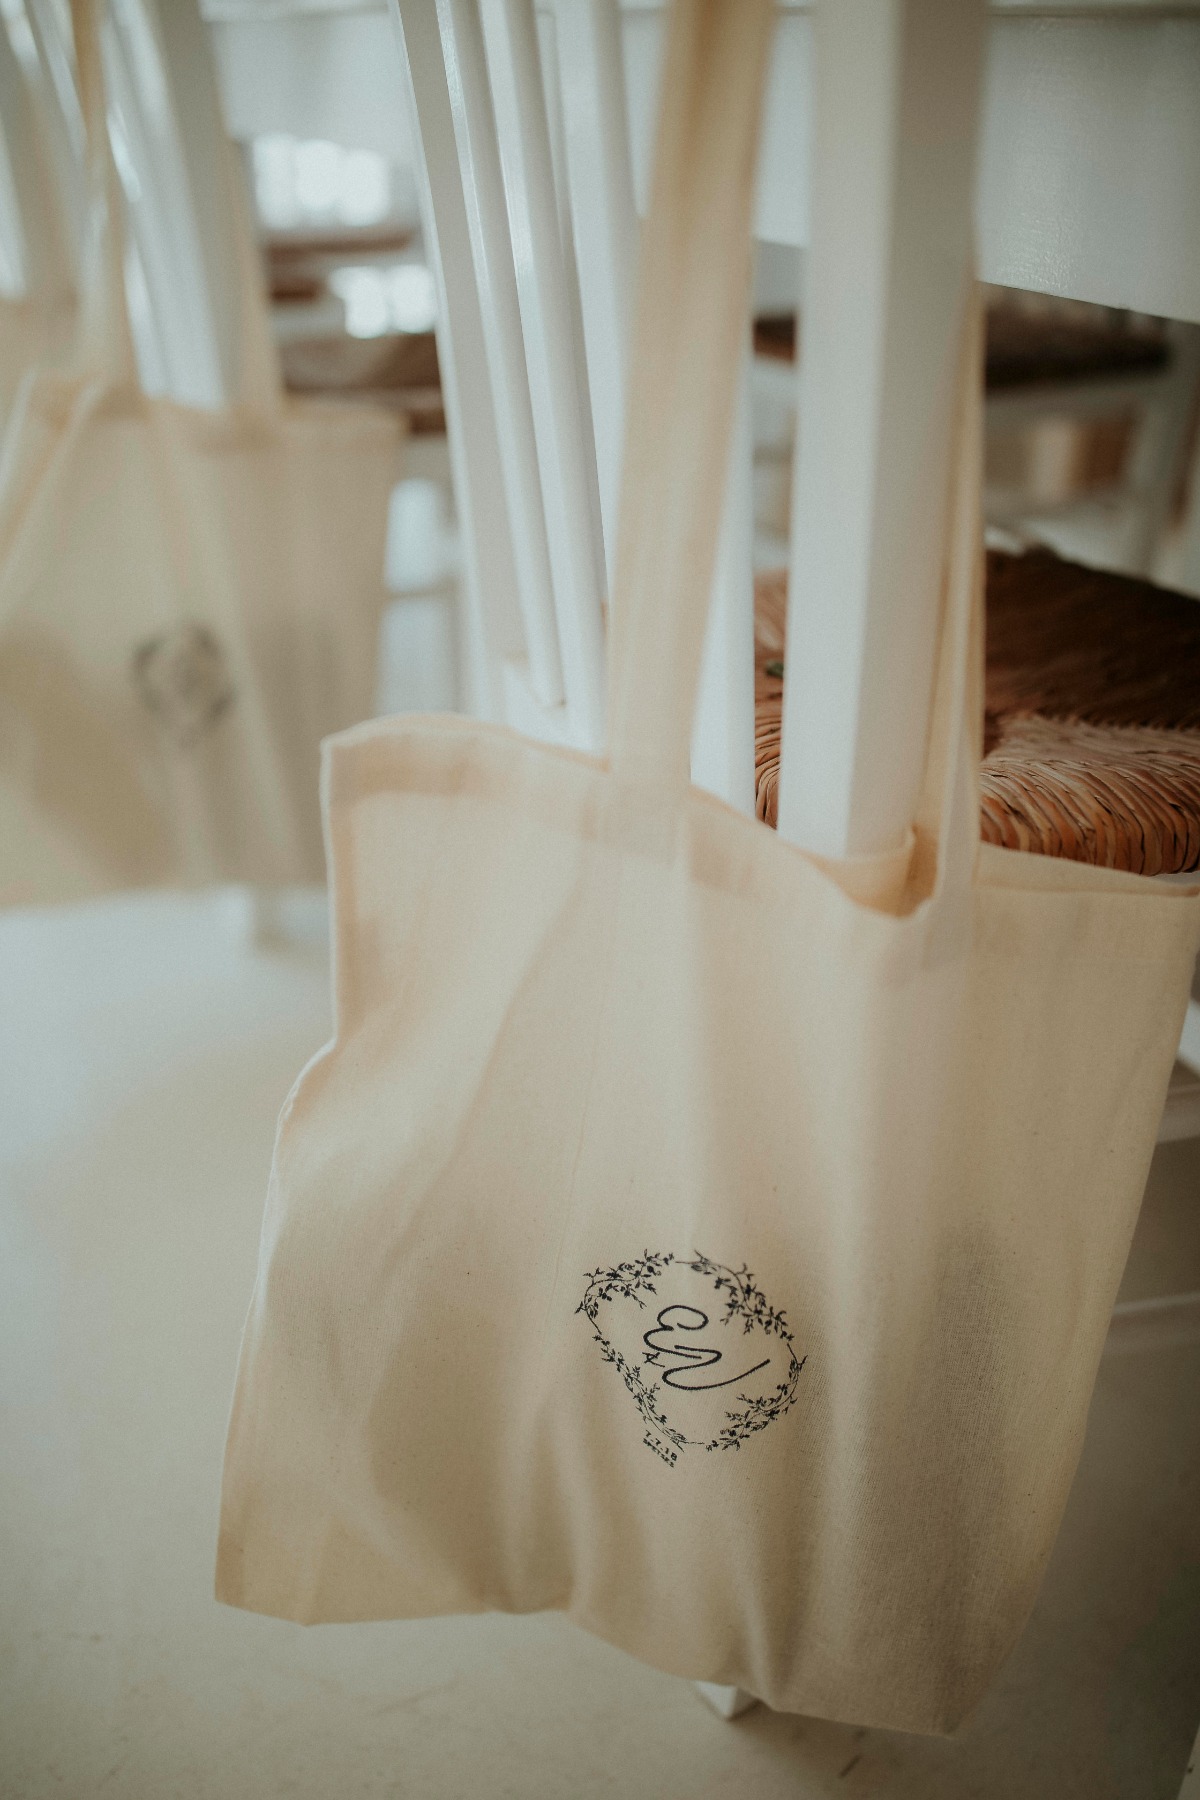 Favor bags for guests